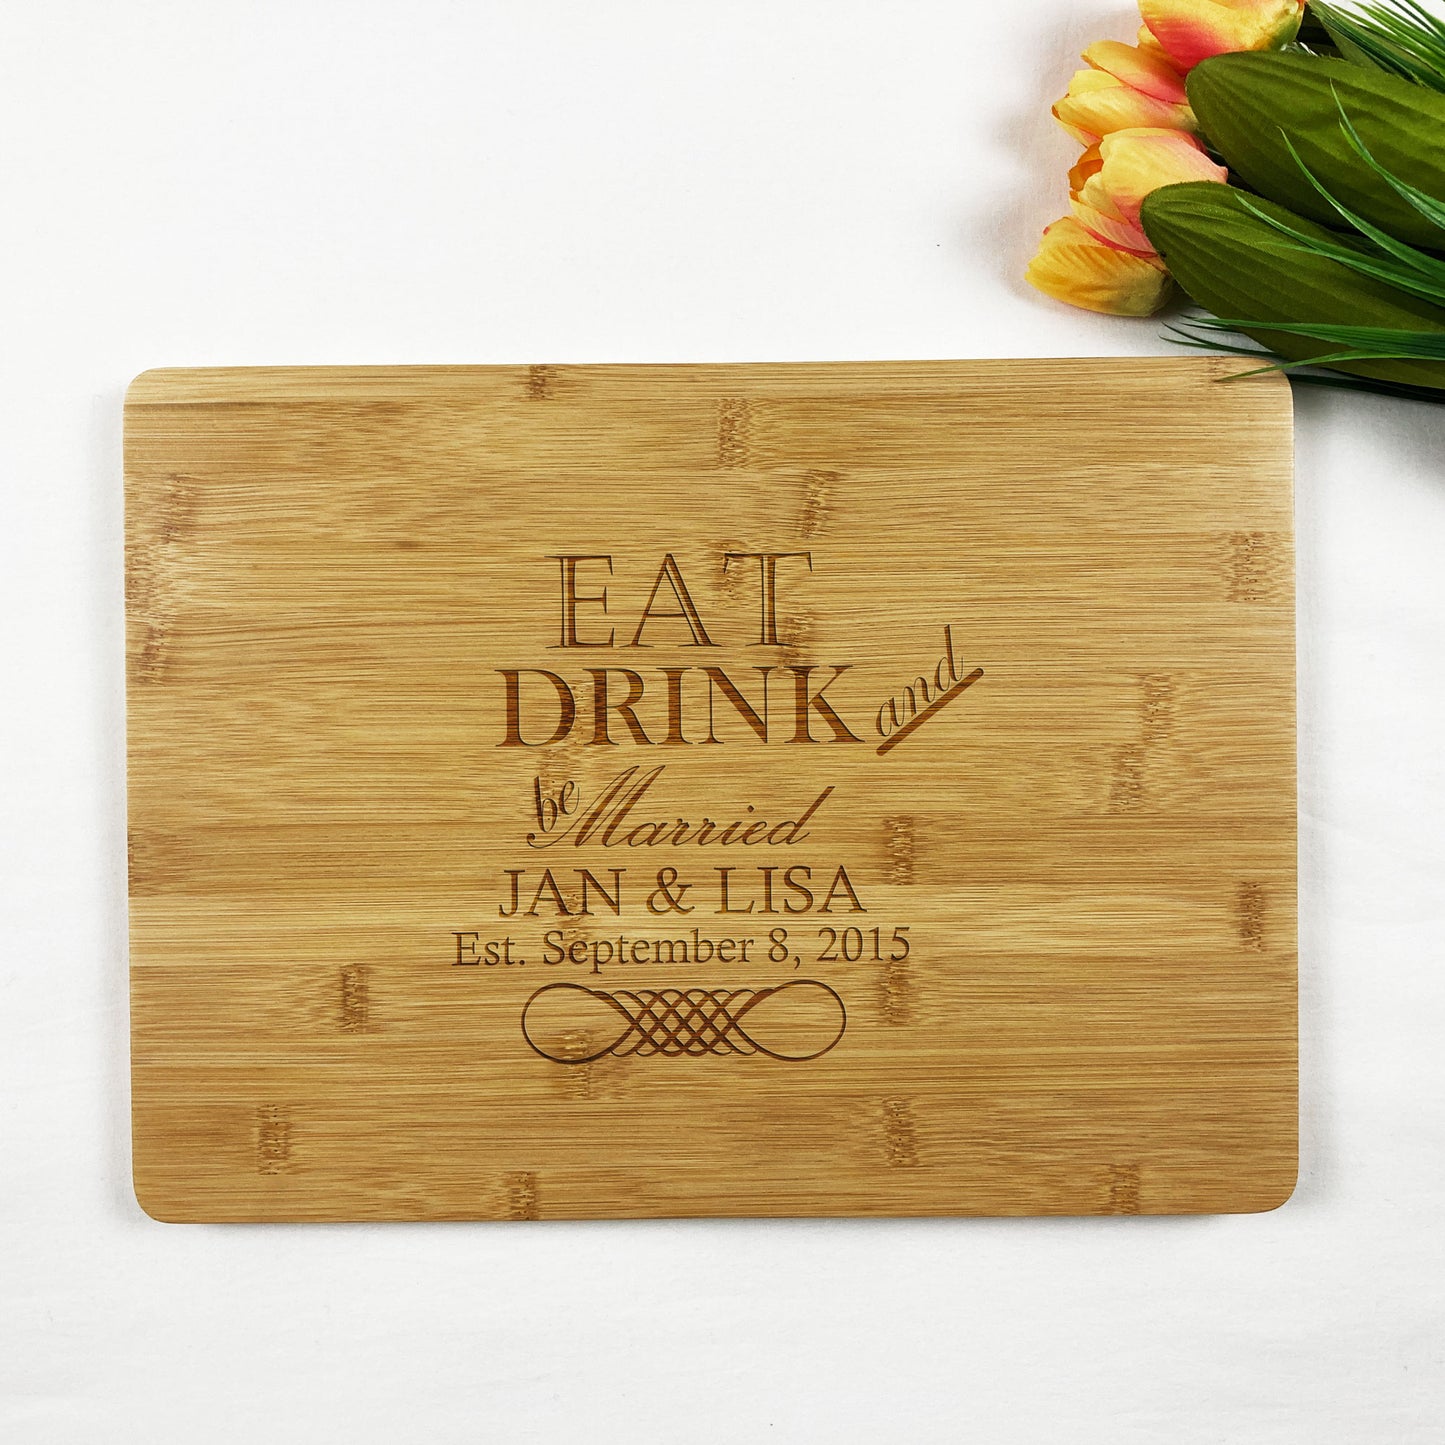 Eat Drink Get Married Wooden Chopping Board Wedding Gift